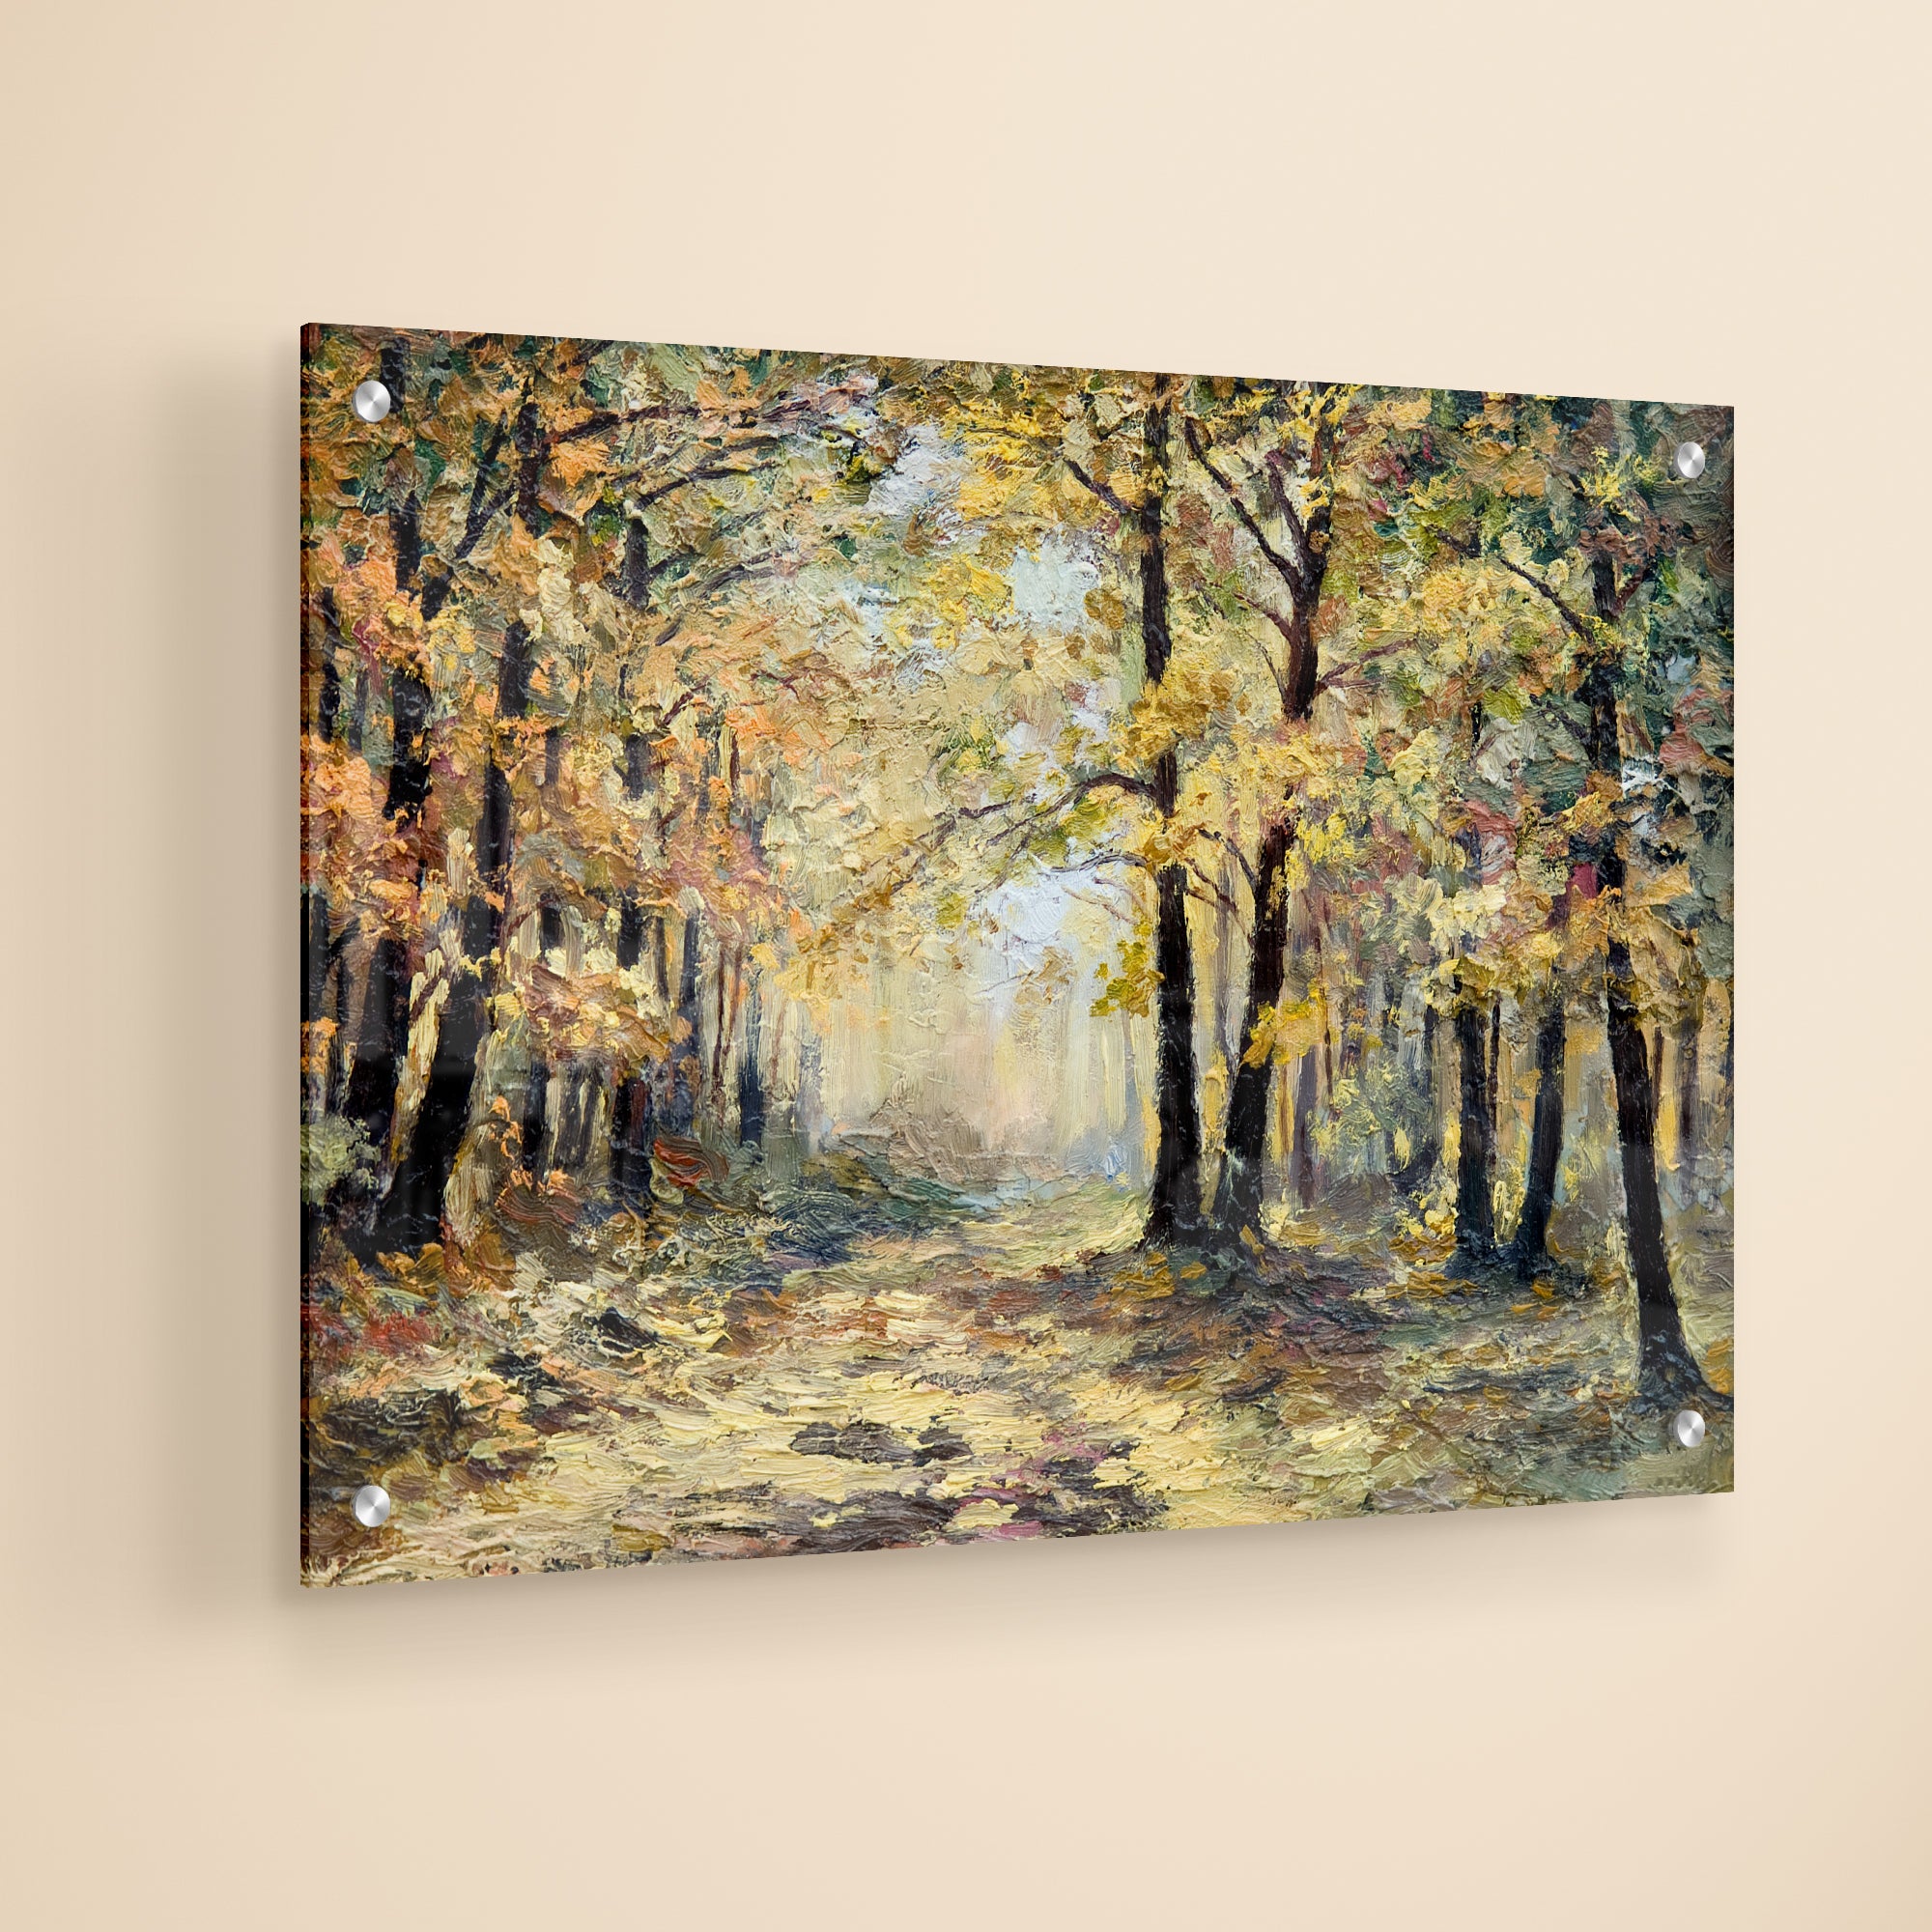 Autumn Forest Abstract Acrylic Wall Painting